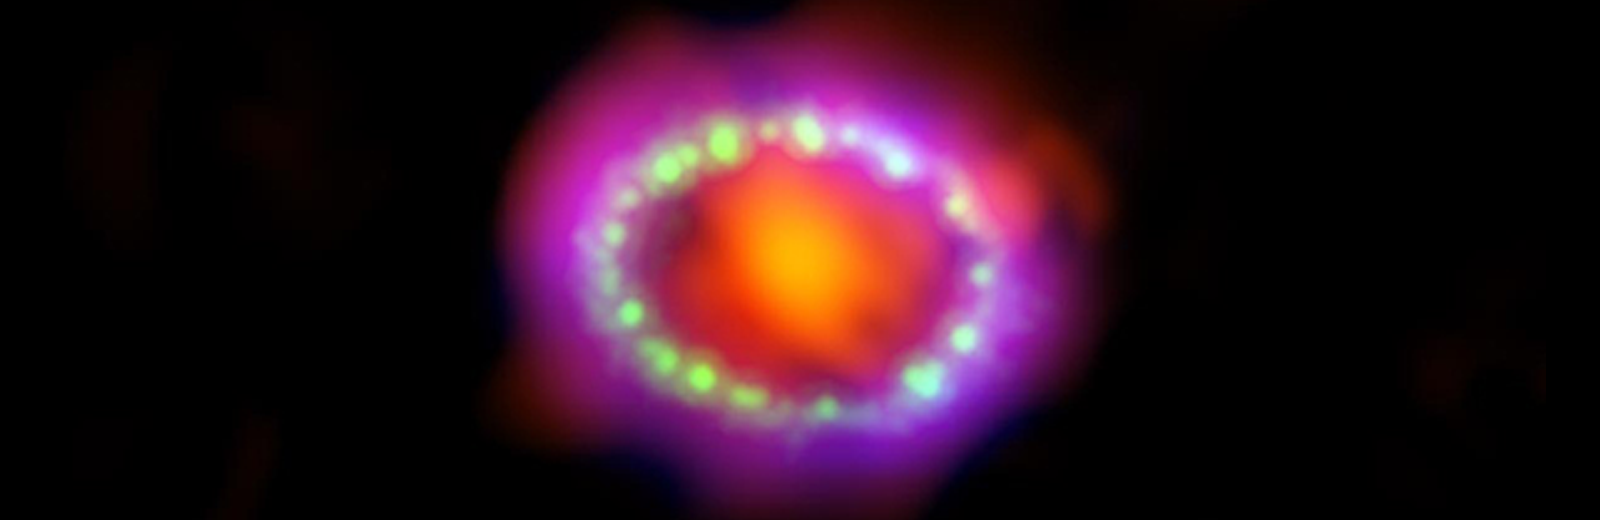 Peering into the heart of a supernova, ALMA maps a huge cloud of dust 